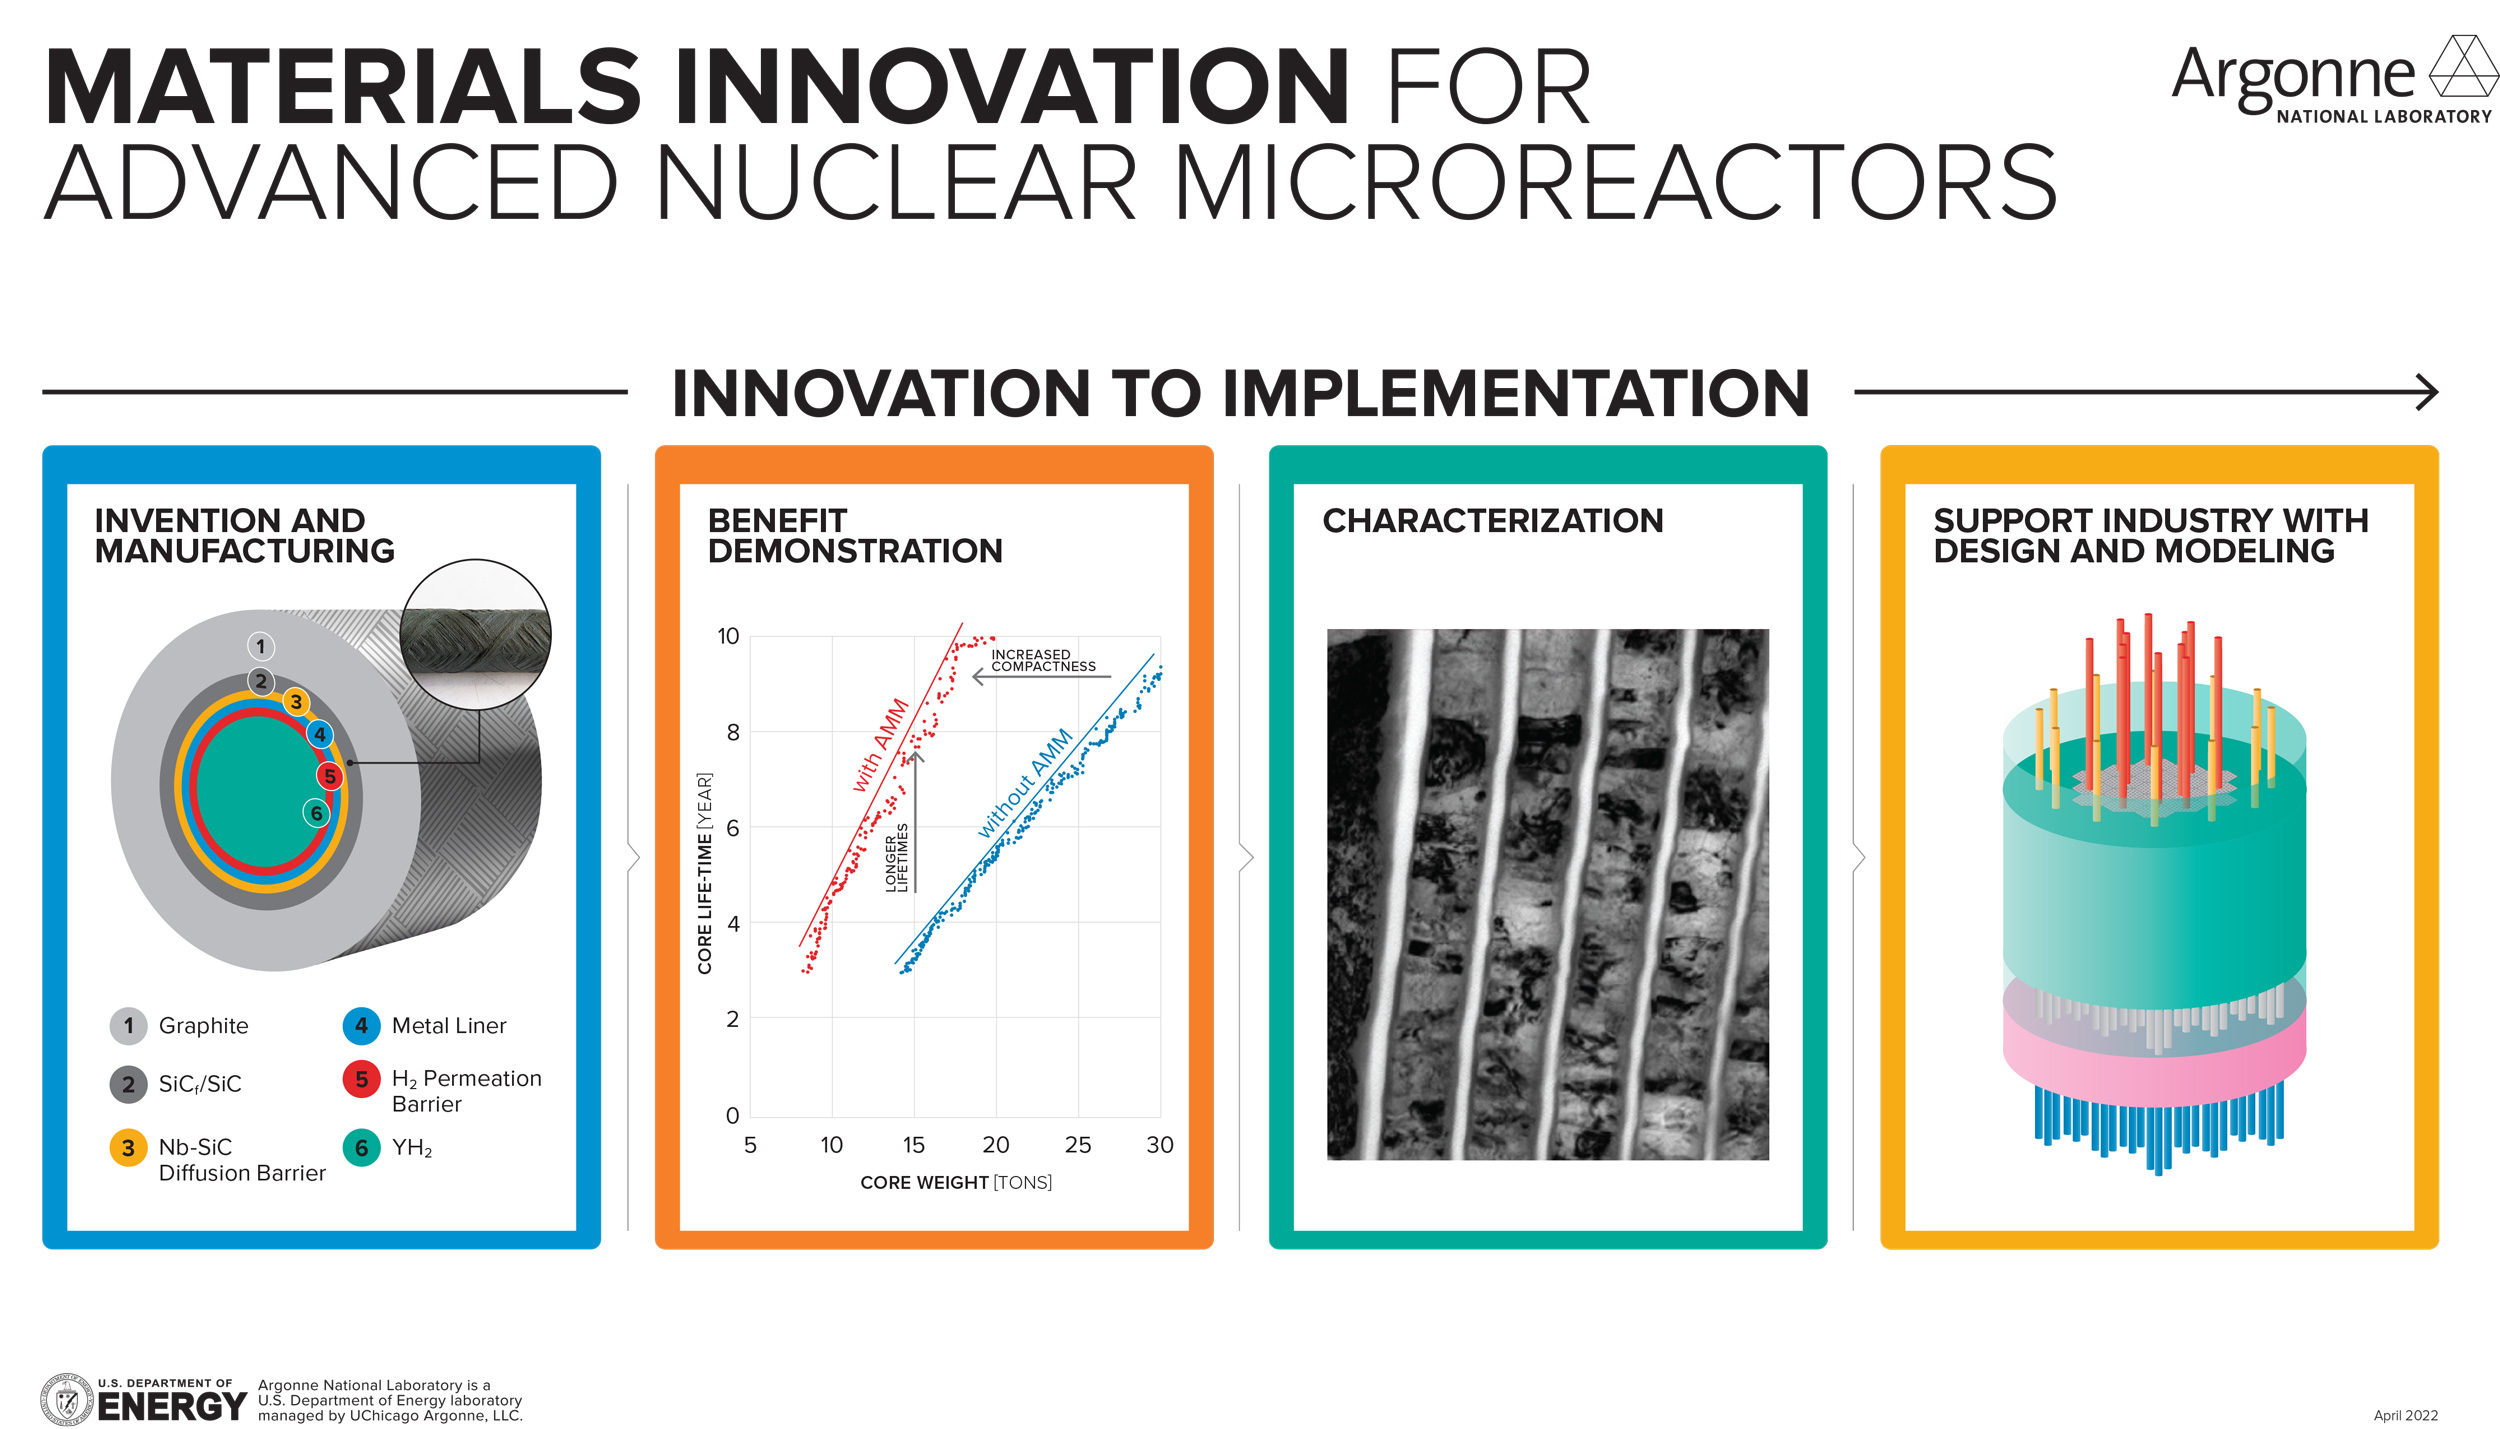 Graphic of Materials Innovation for Advanced Nuclear Microreactors from Innovation to Implementation.